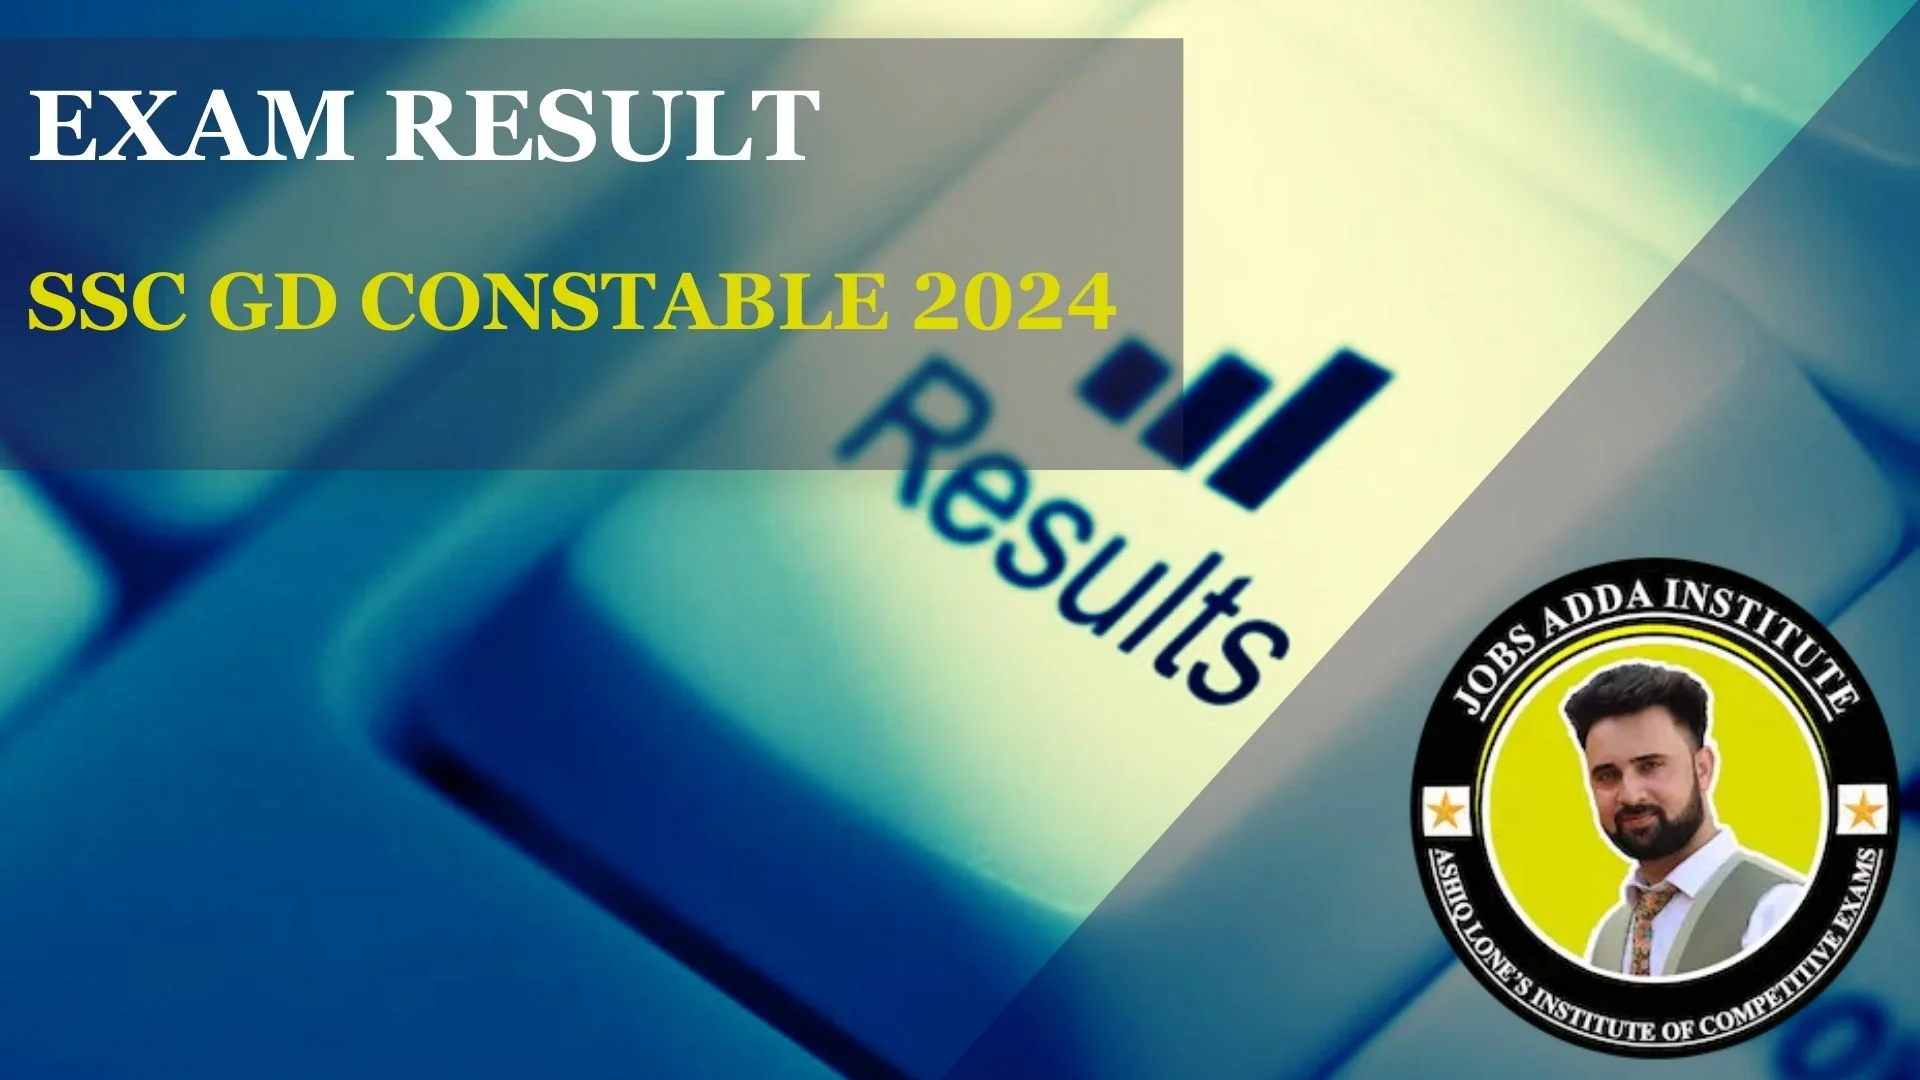 SSC GD Constable 2024 Check Your Score Card